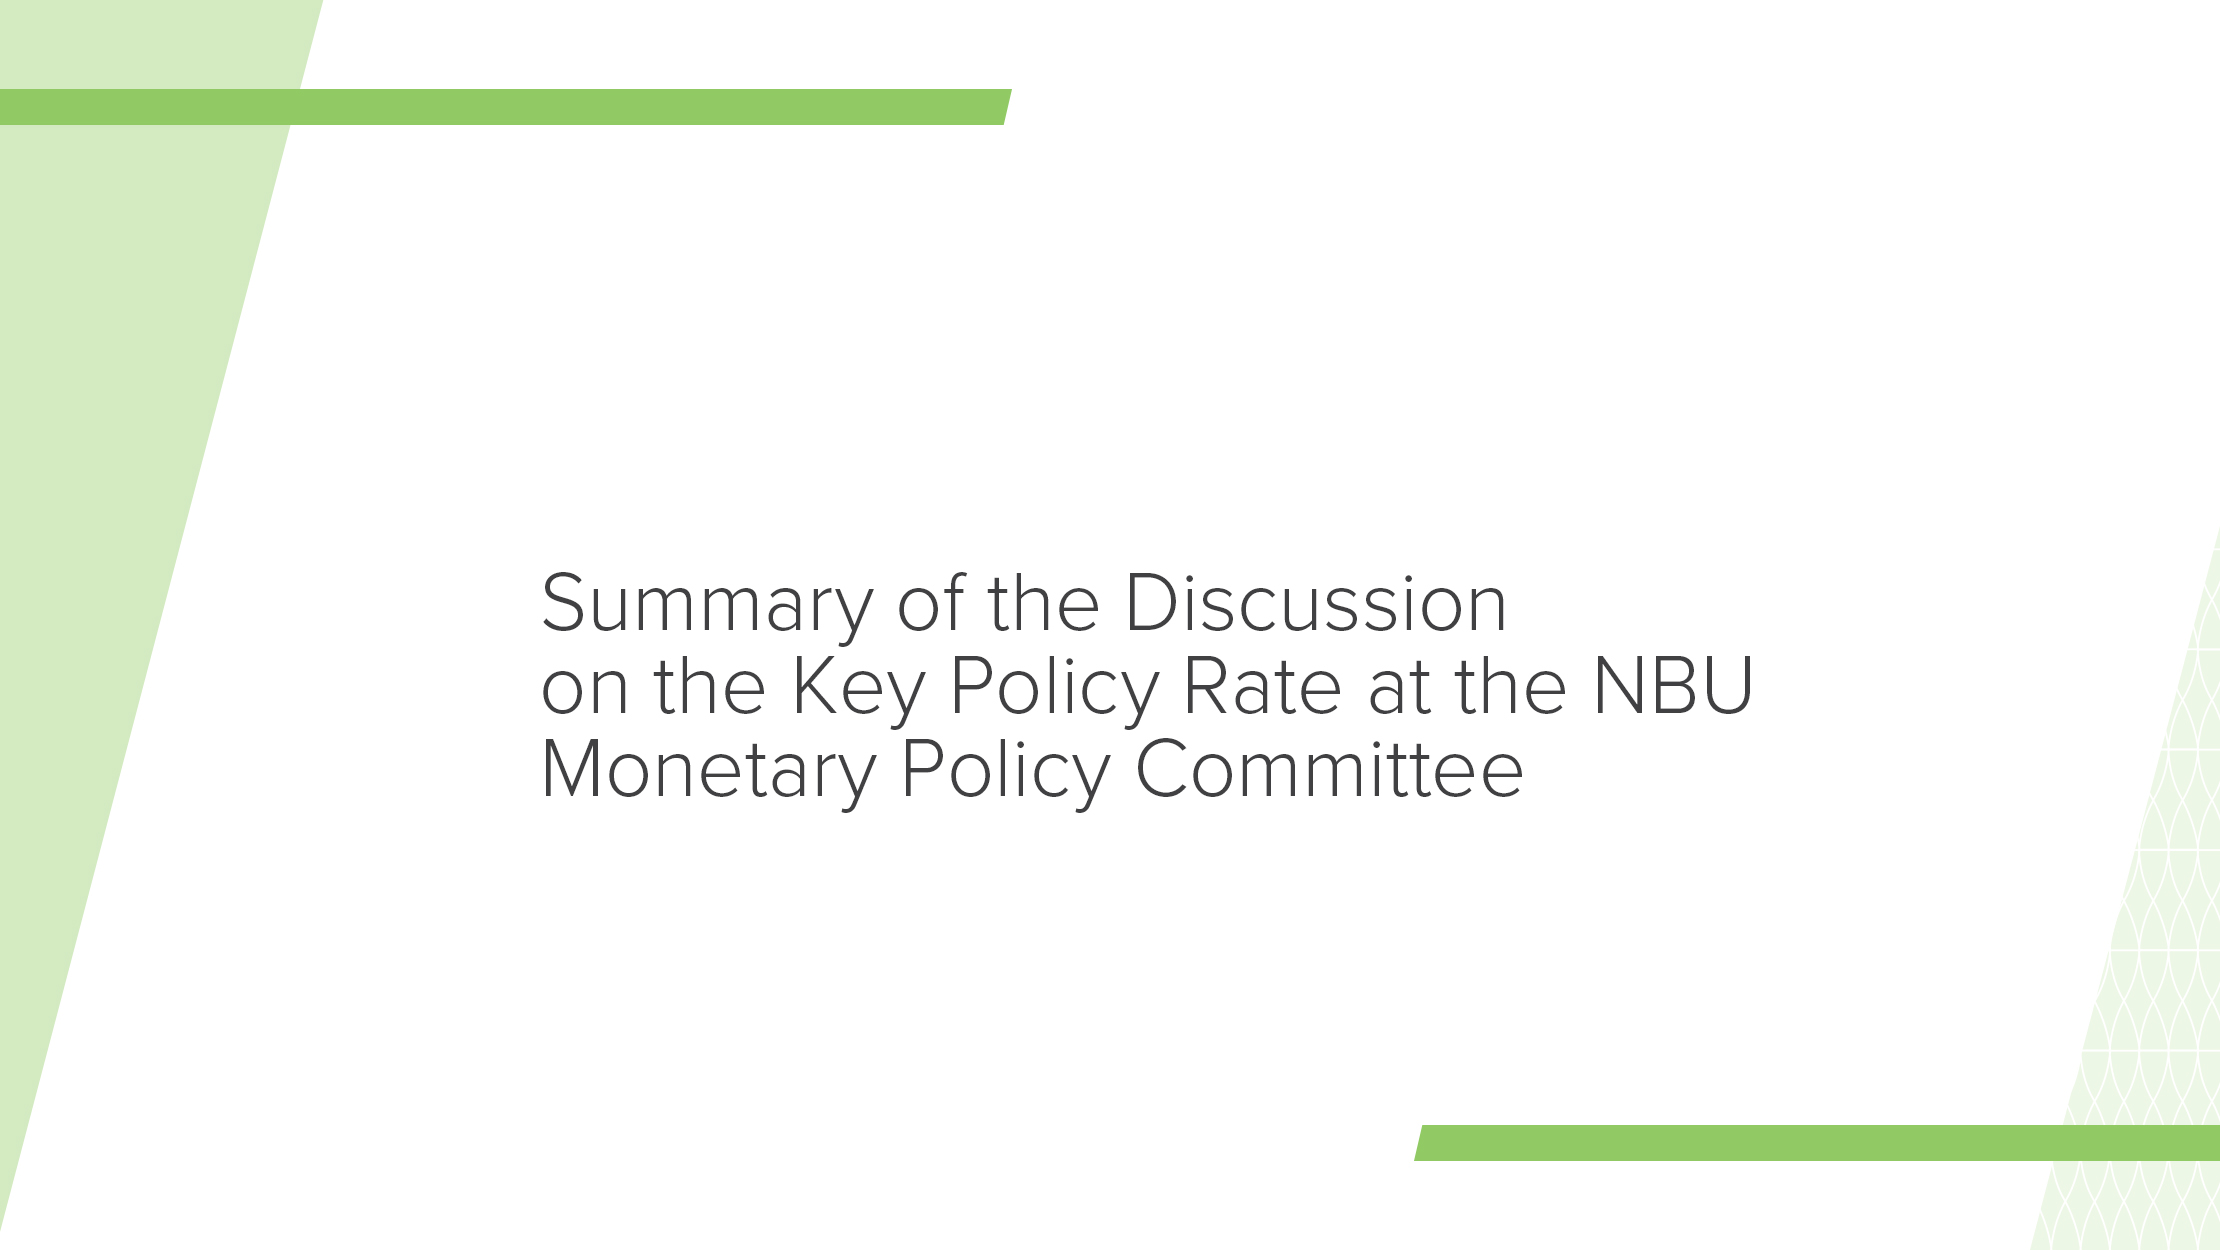 Summary of the Key Policy Rate Discussion by the NBU Monetary Policy Committee 22-23 October 2019